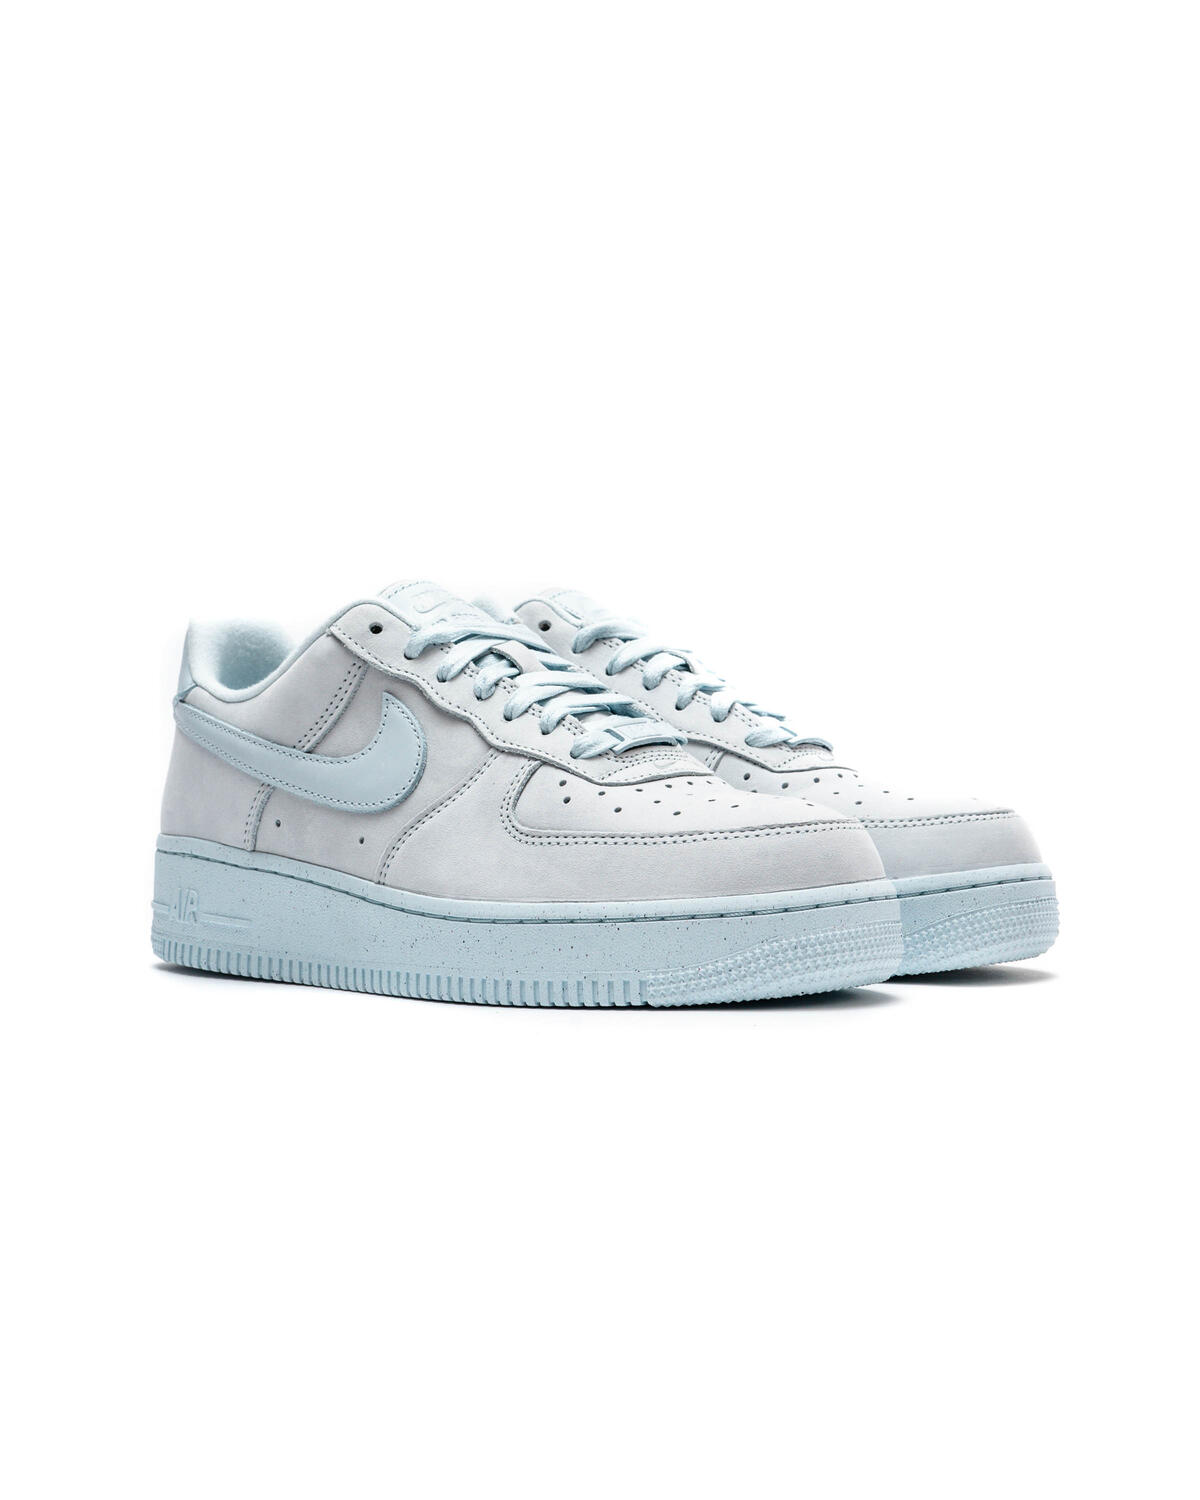 Nike Women's Air Force 1 '07 Essential Casual Shoes